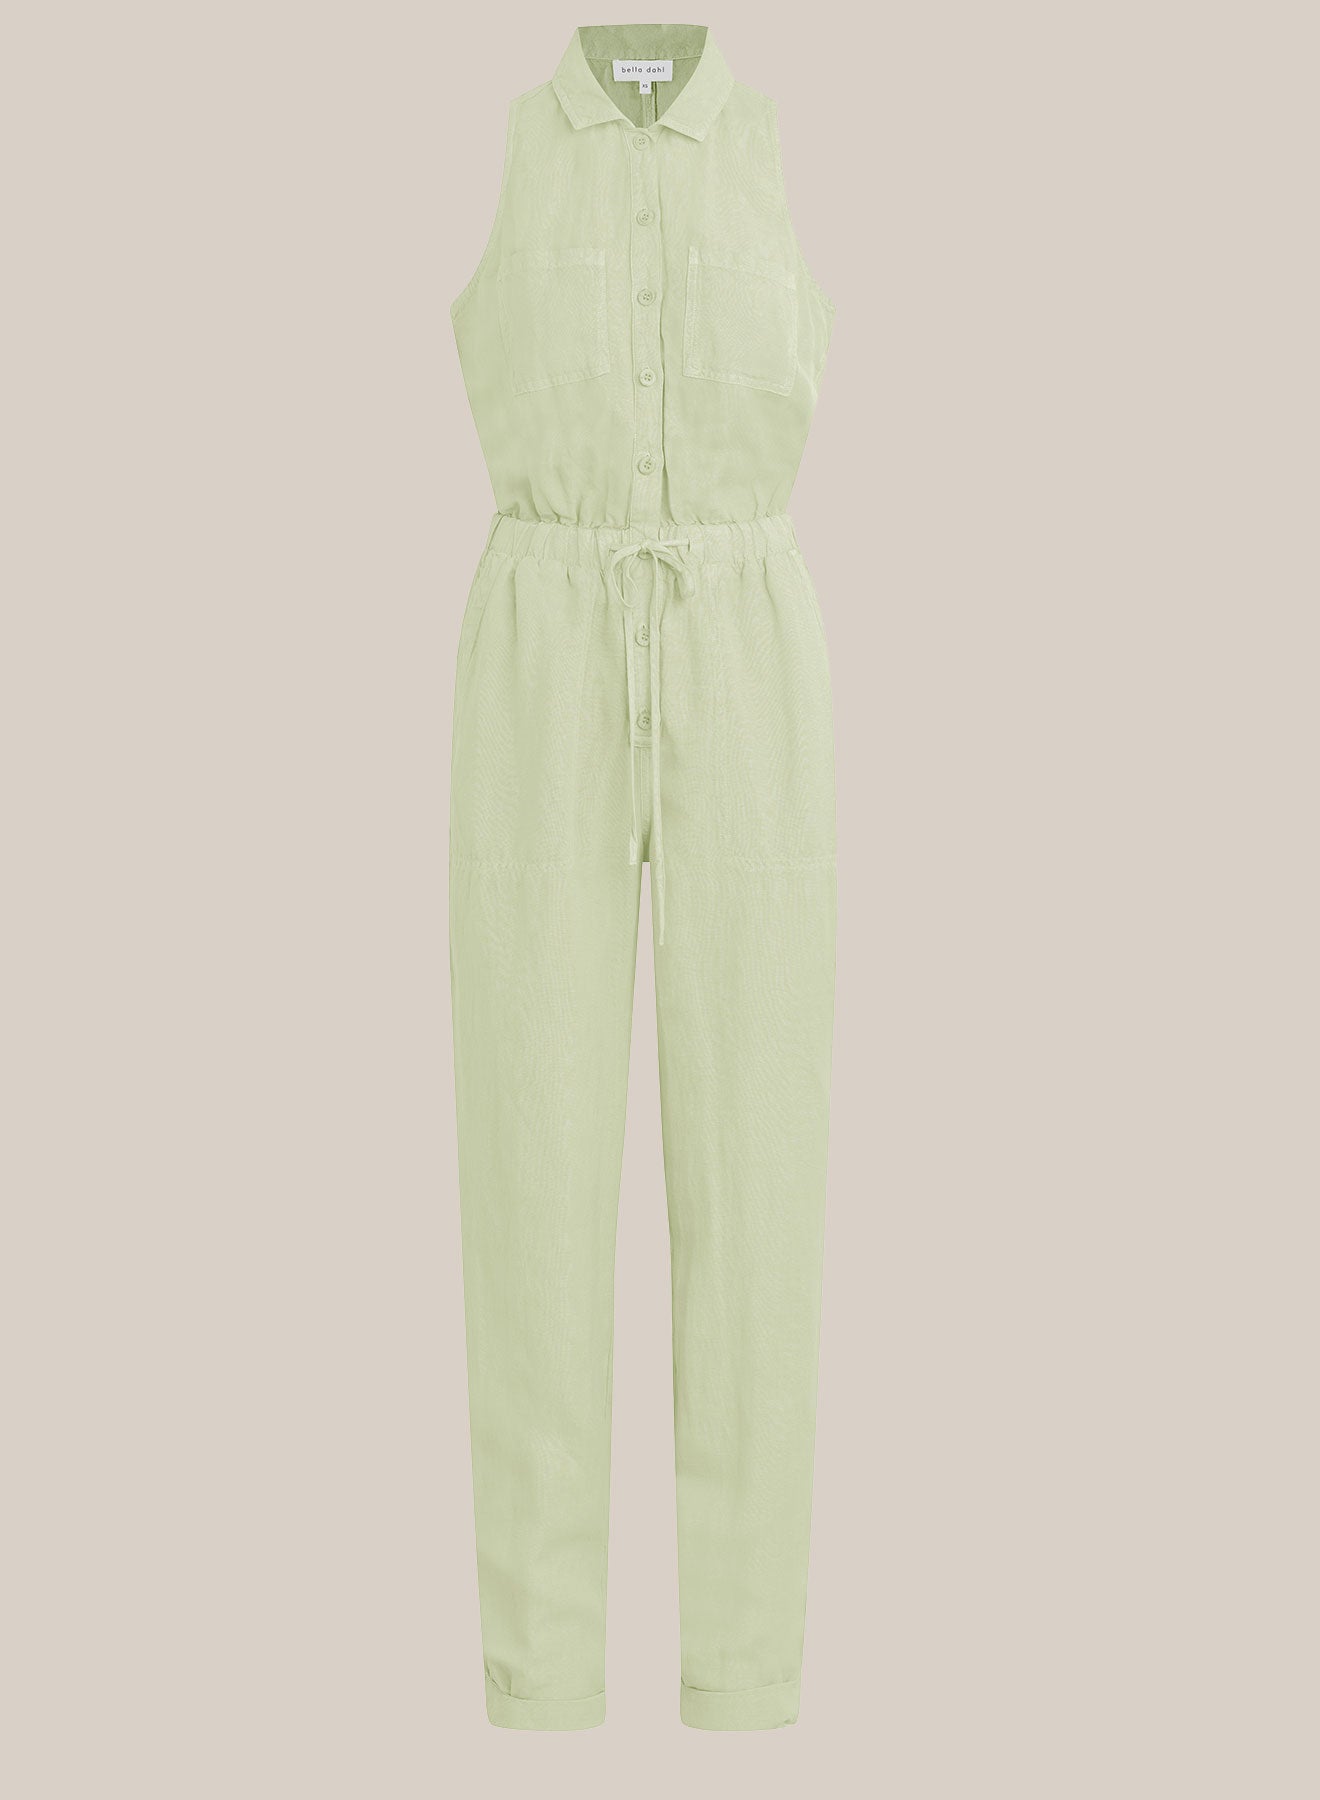 Bella DahlSunday Pocket Jumpsuit - Muted ArmyJumpsuits & Rompers